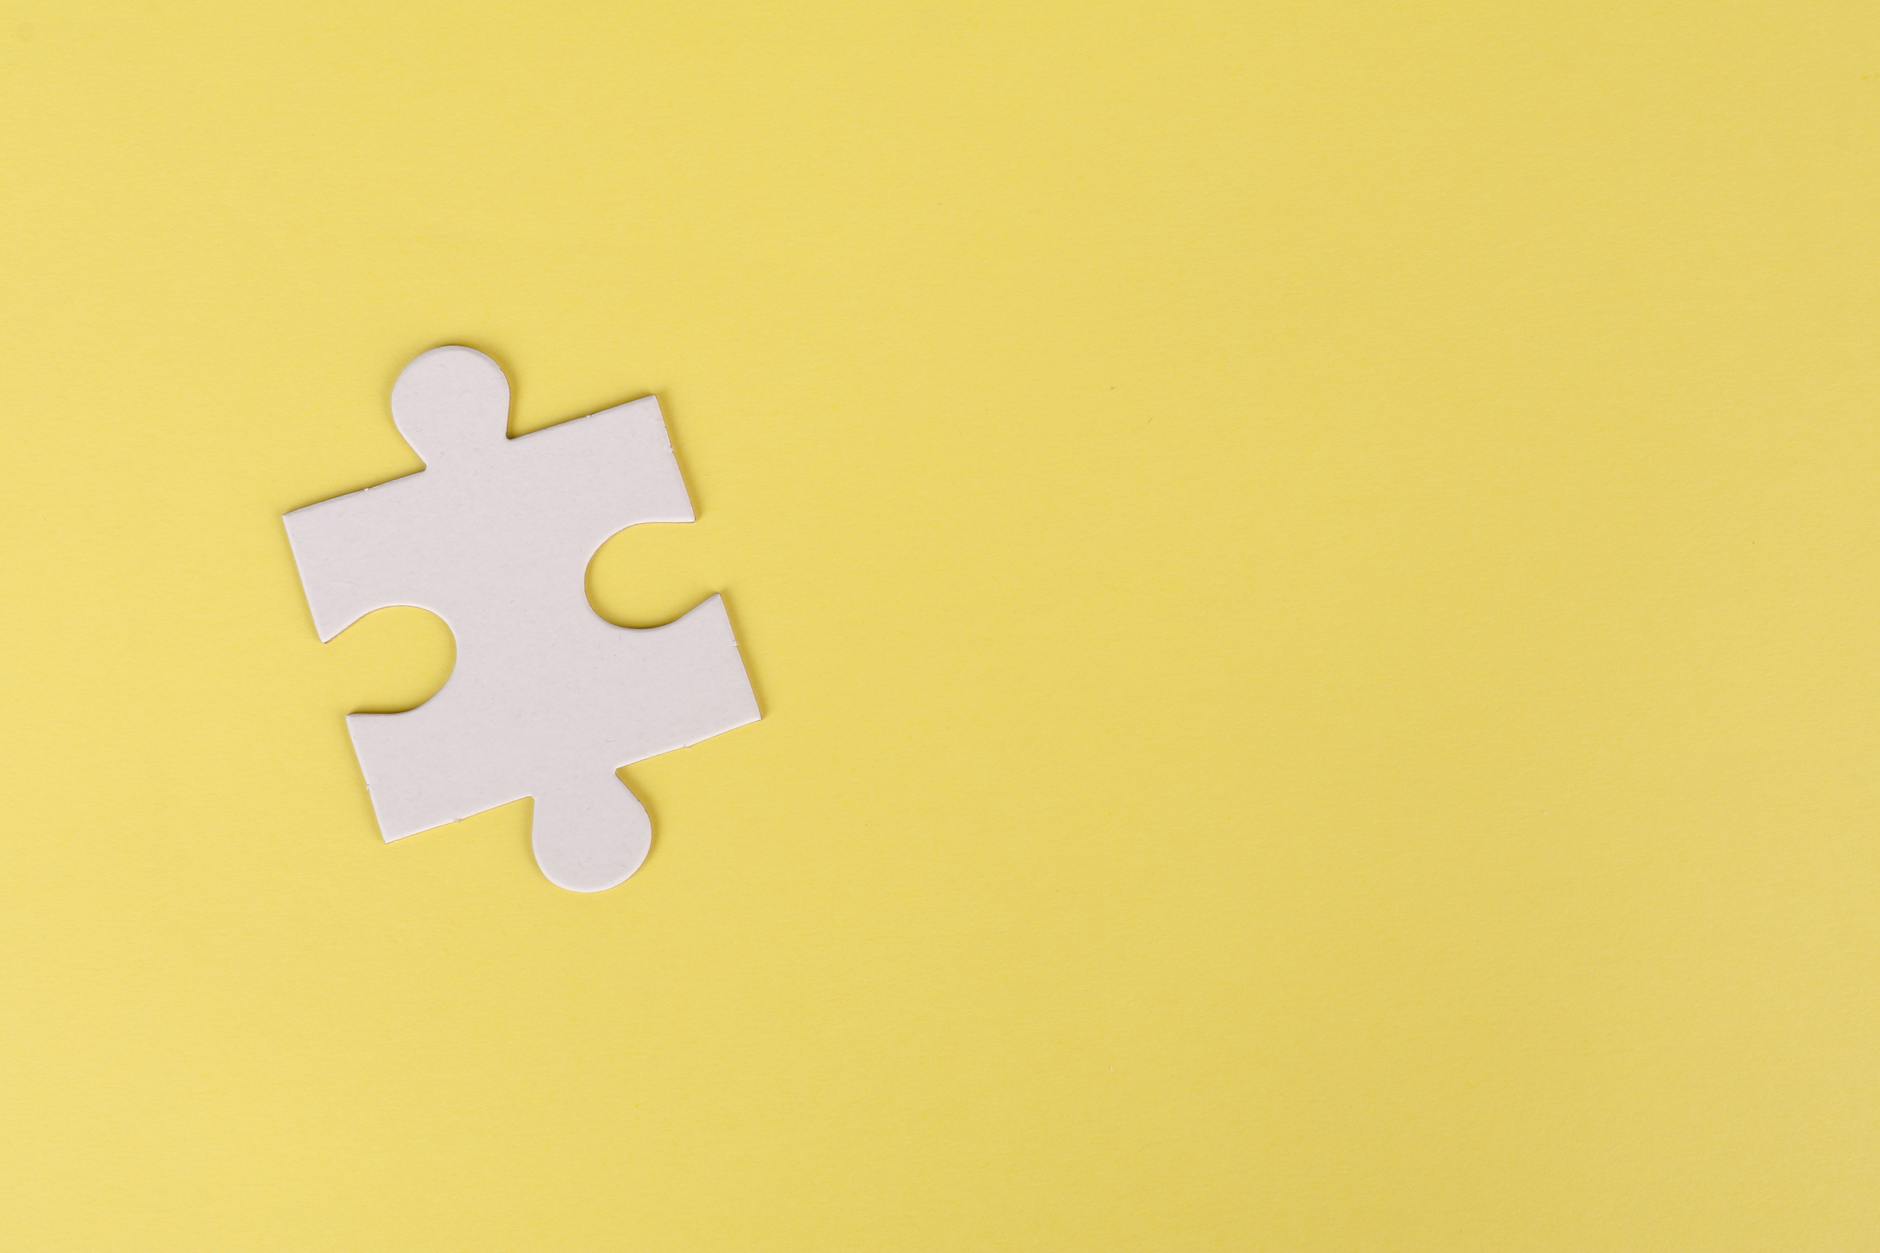 jigsaw puzzle on yellow background